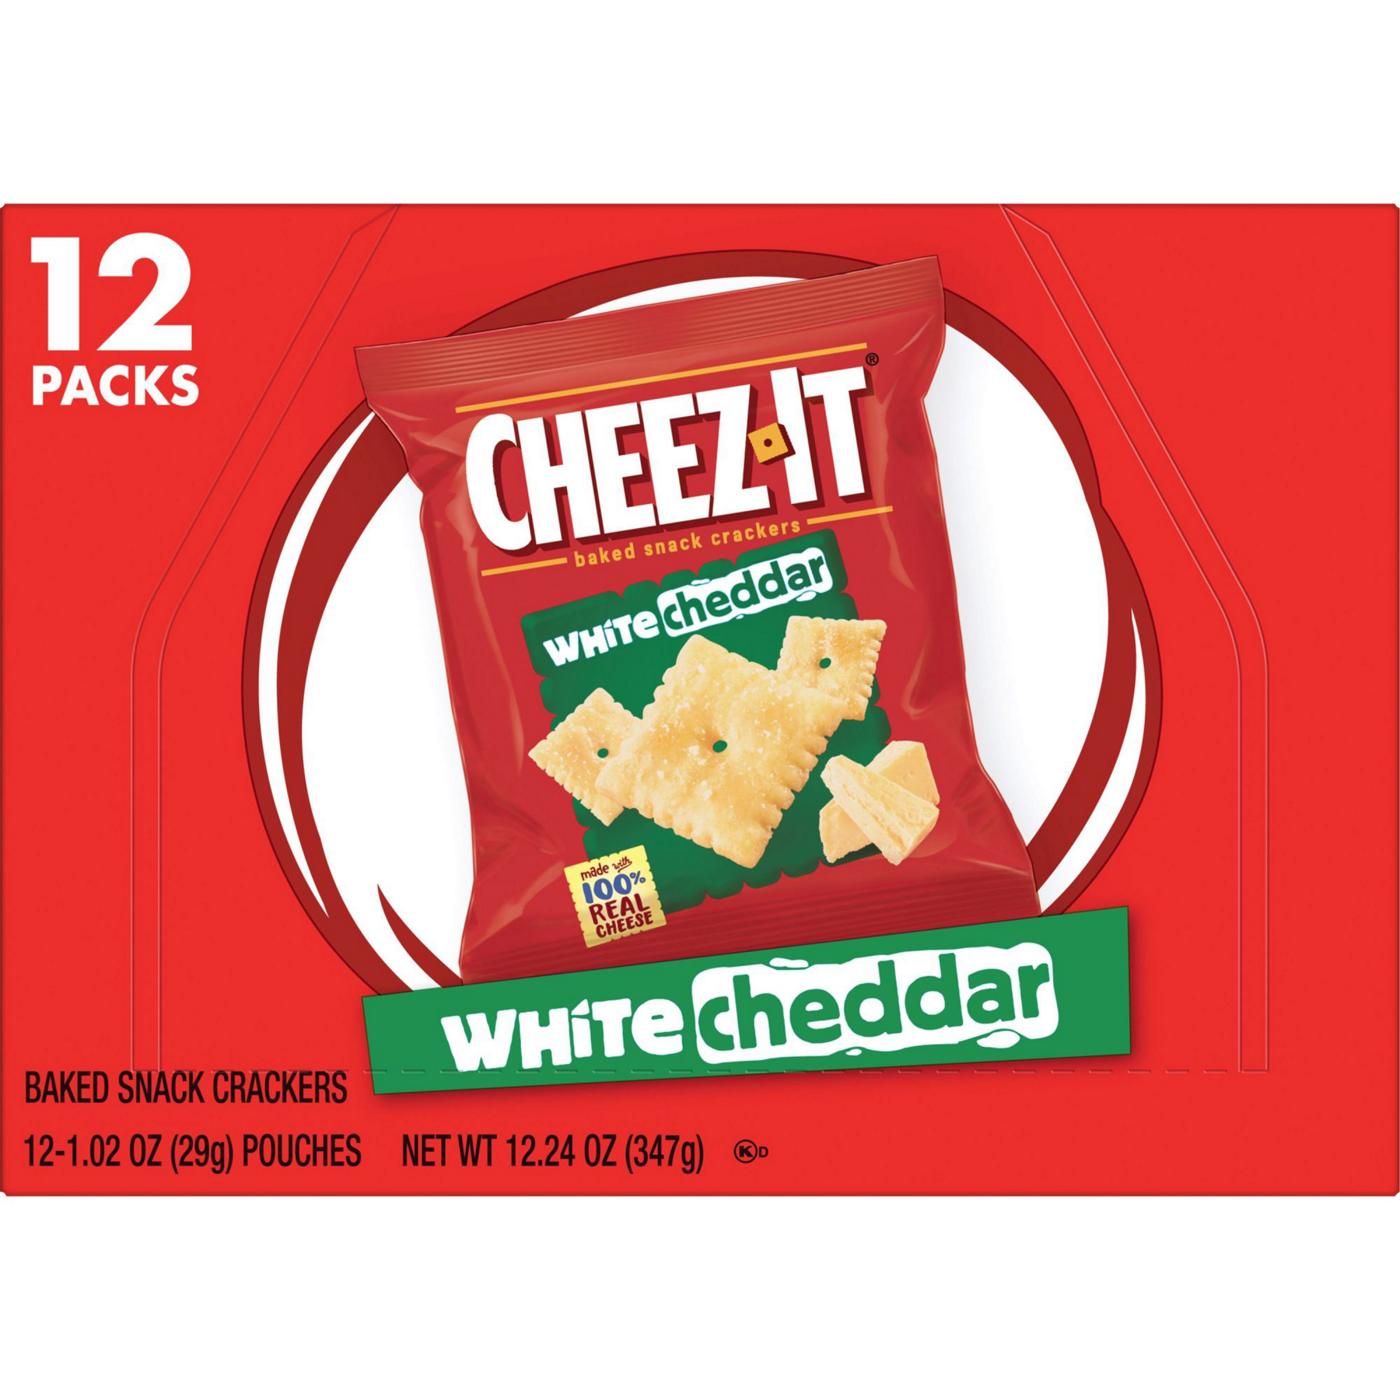 Cheez-It White Cheddar Baked Snack Crackers, 12.24 oz; image 1 of 5